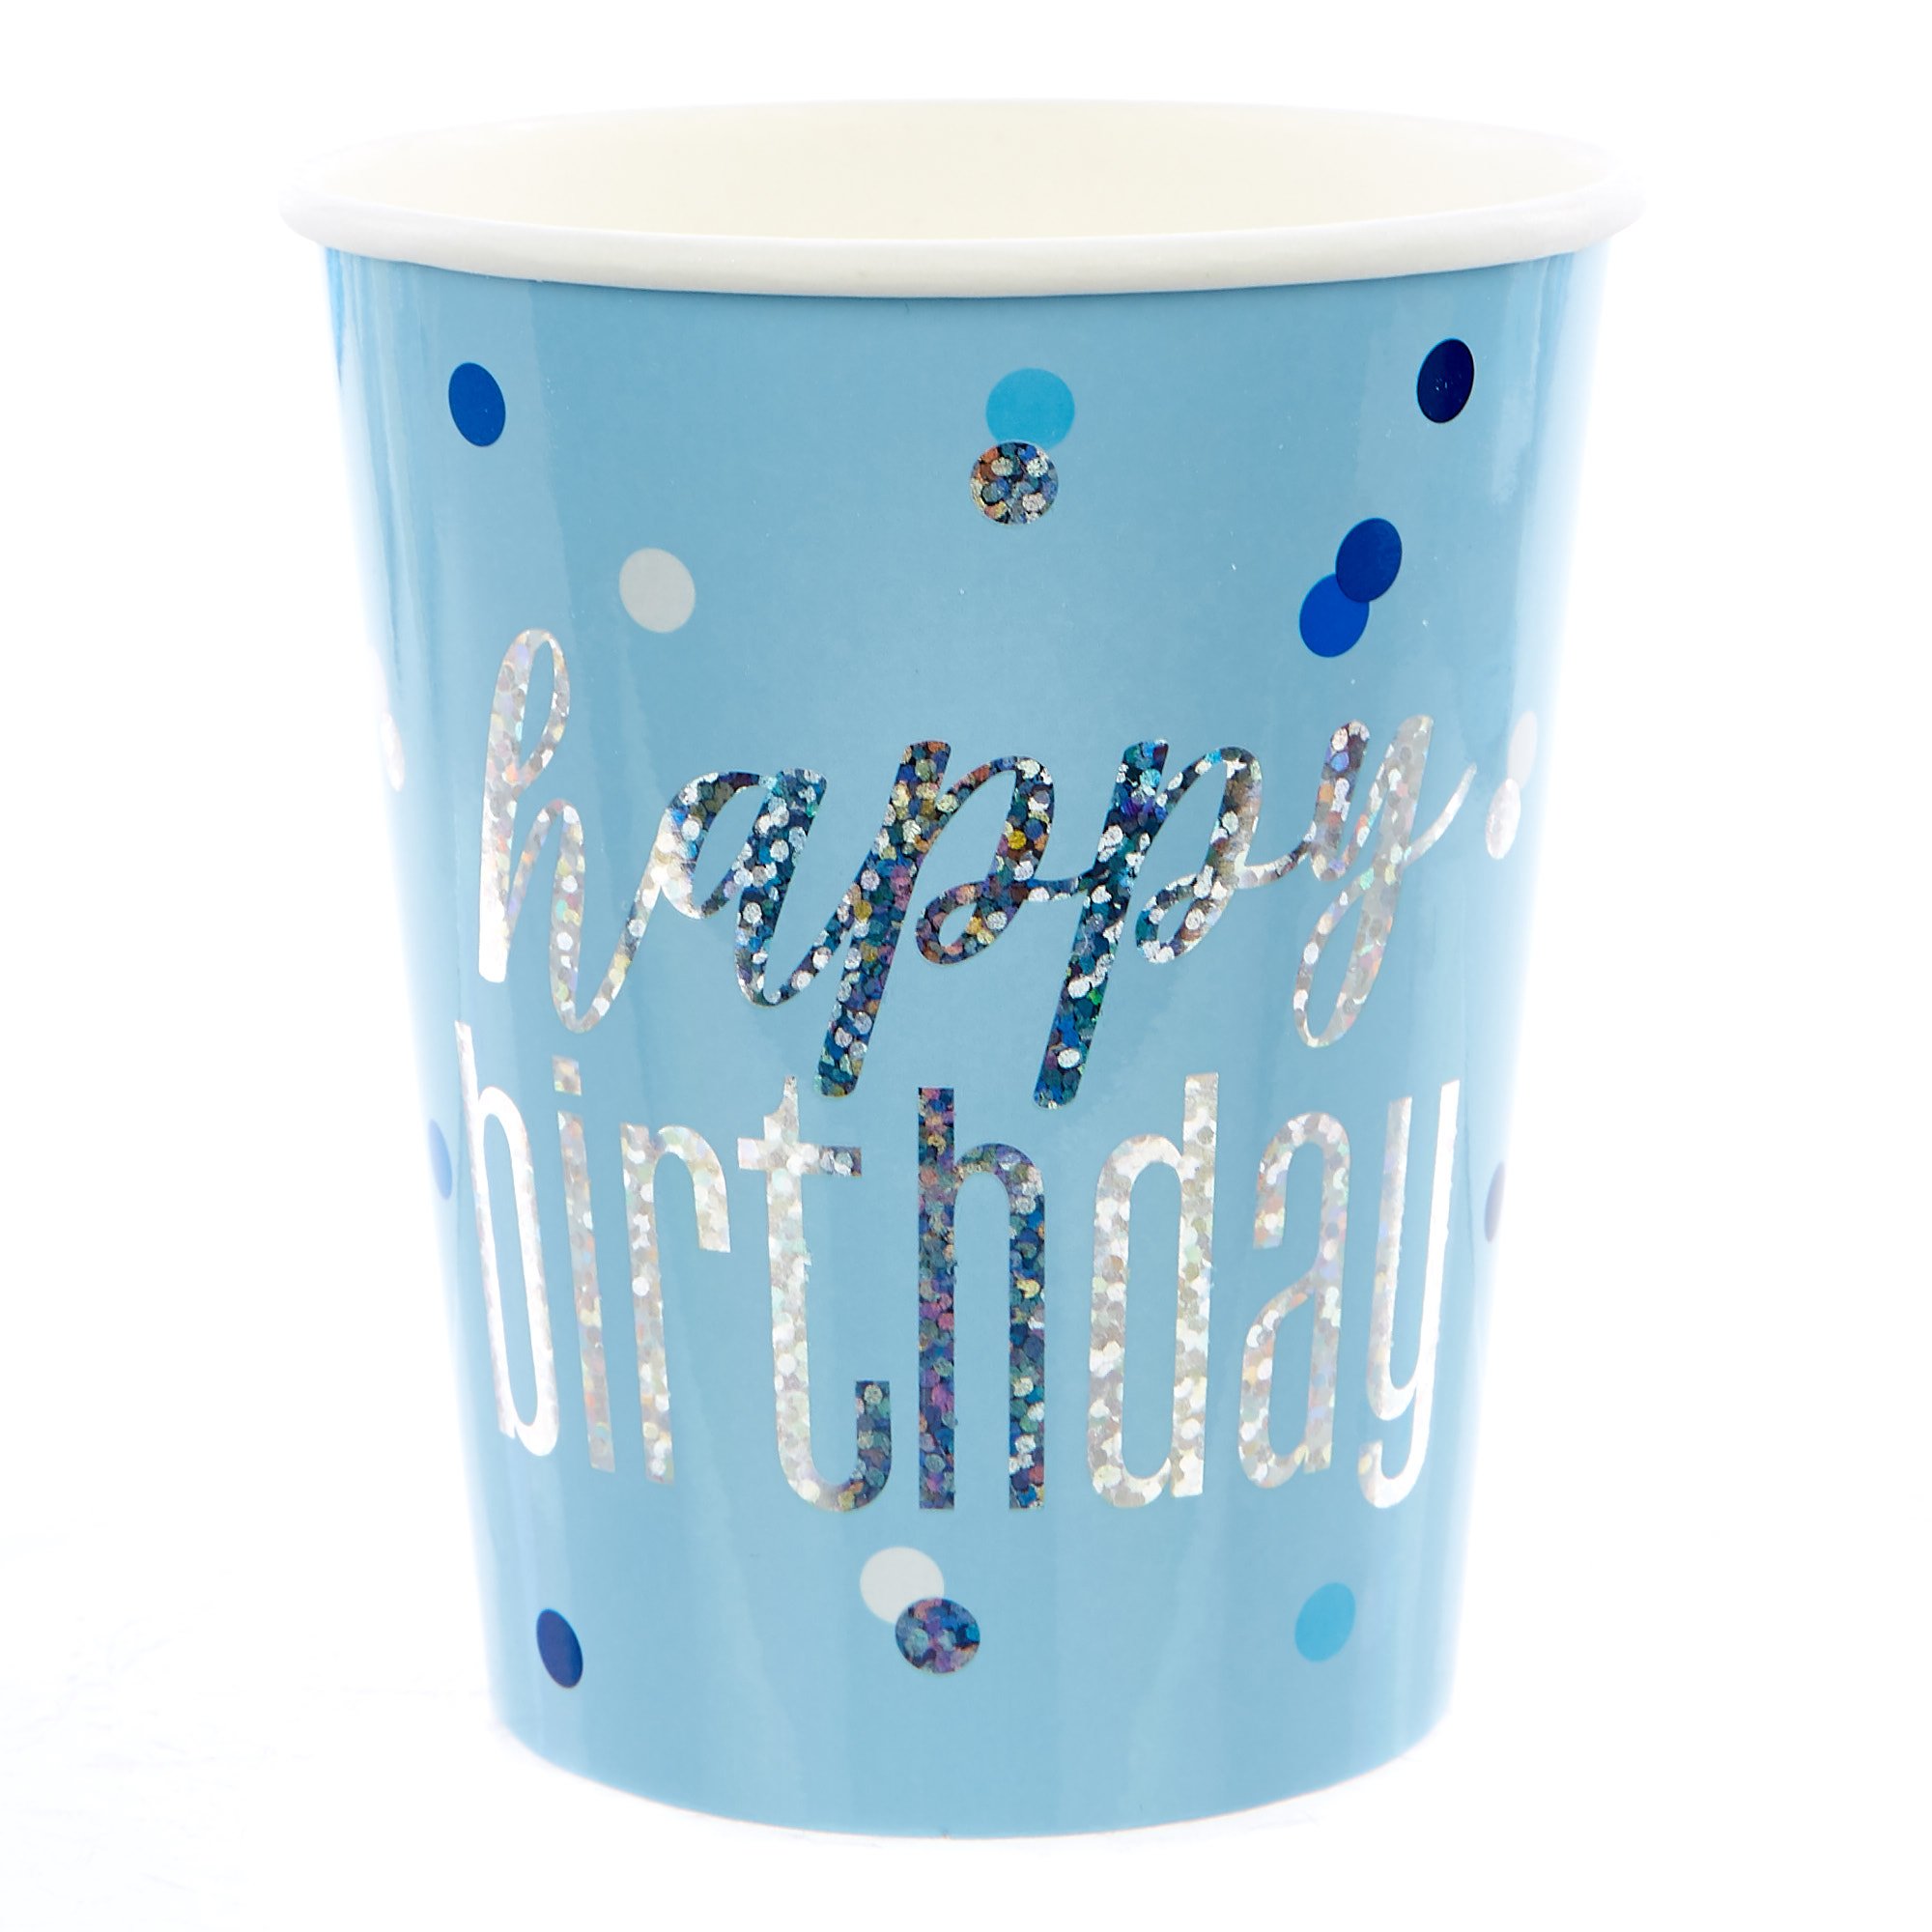 Blue 50th Birthday Party Tableware & Decorations Bundle - 16 Guests